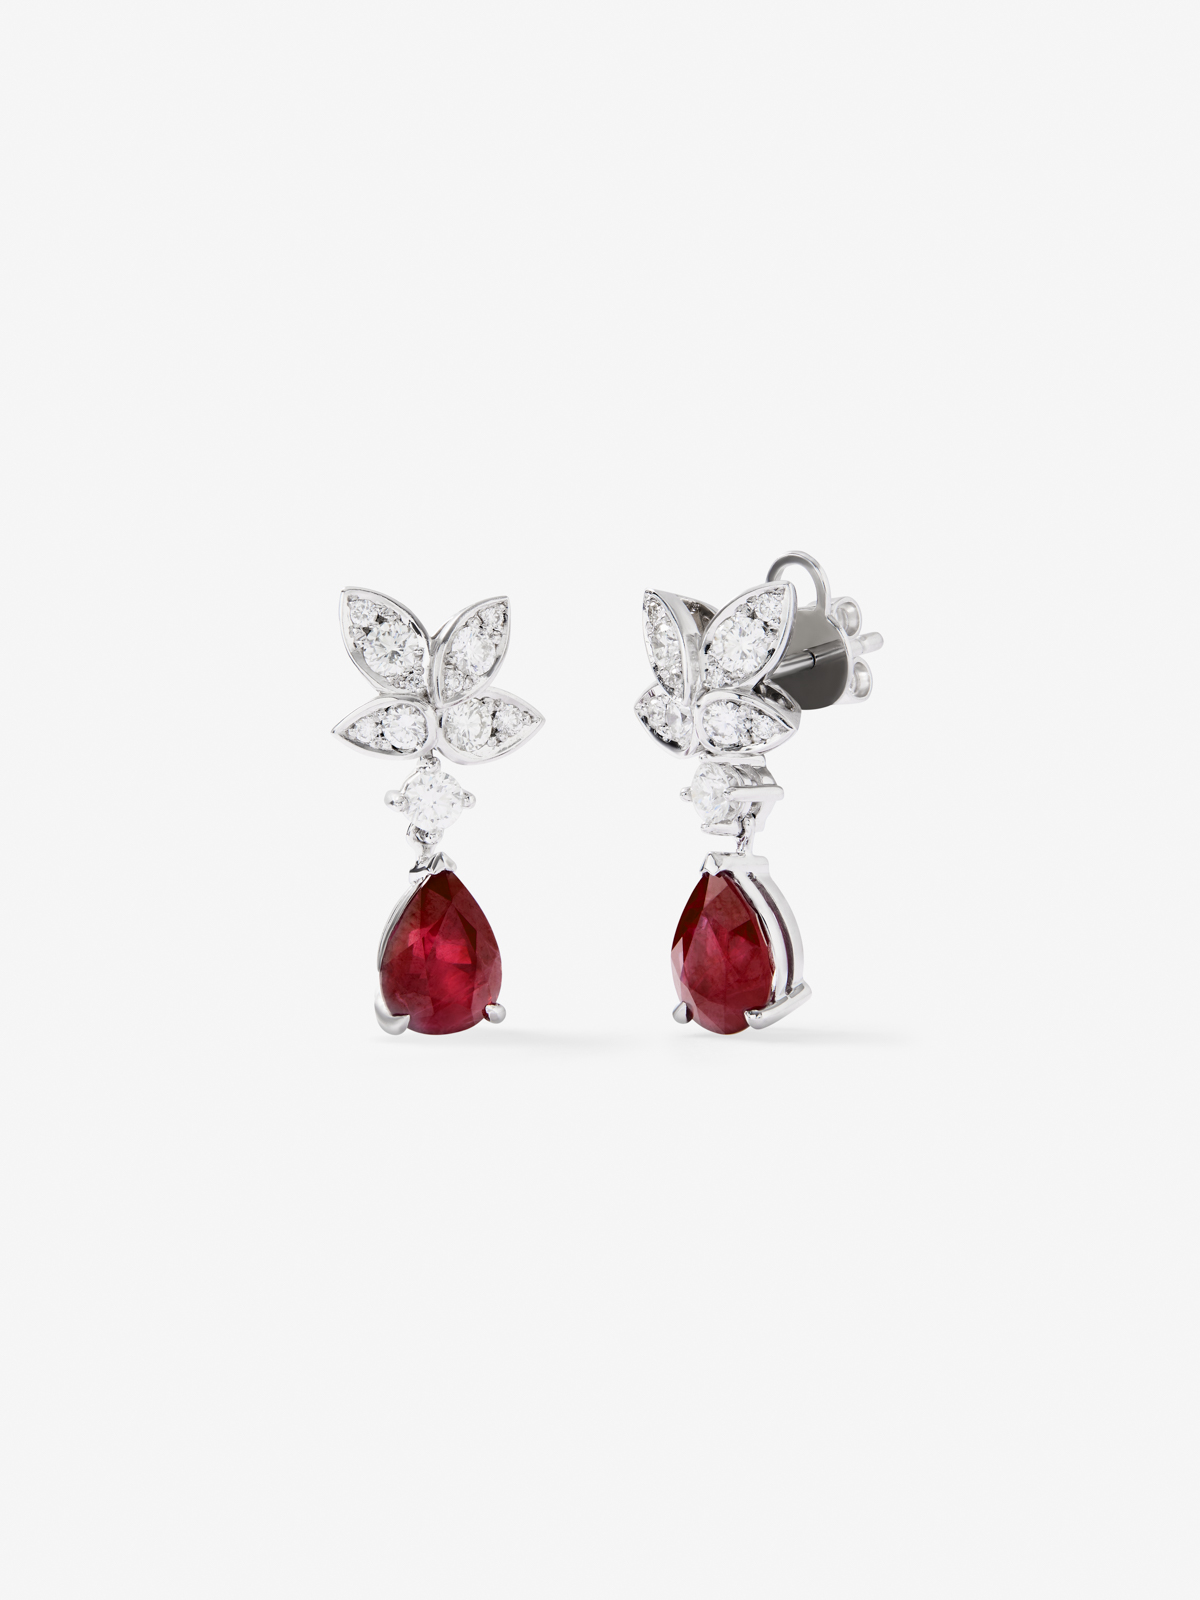 18K white gold earrings with red rubies Pigeon Blod in pear size 4.62 cts and white diamonds in bright size of 0.89 cts